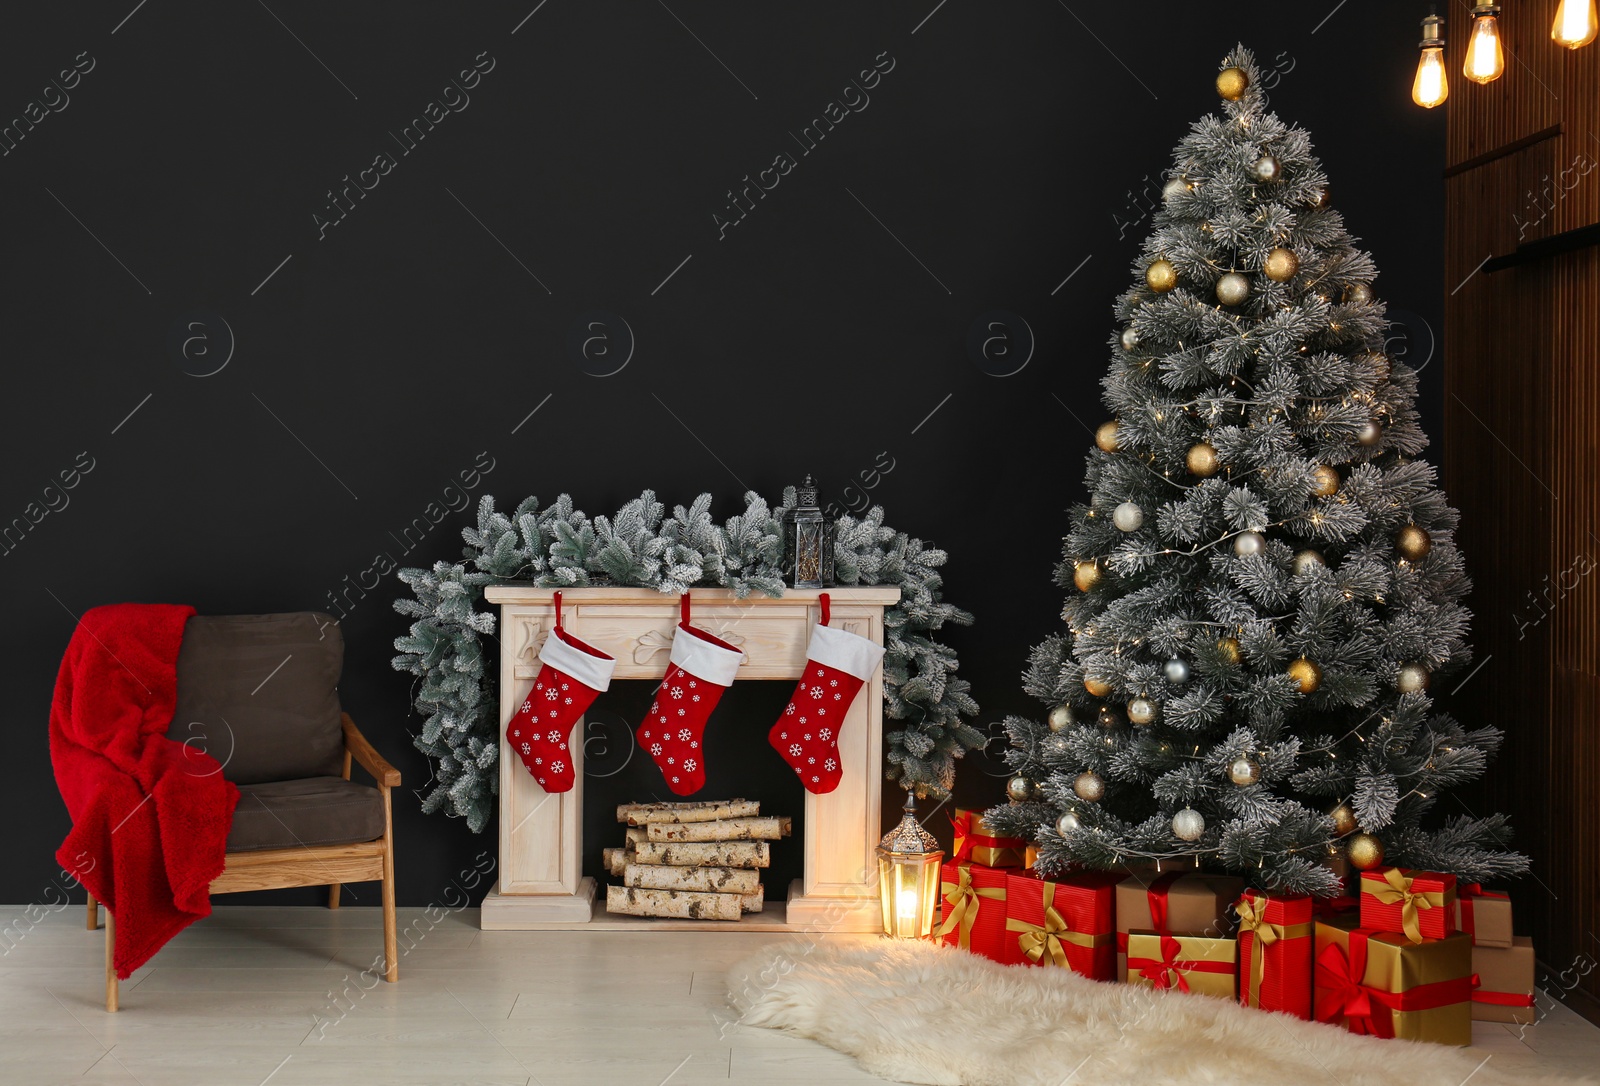 Photo of Stylish Christmas interior with decorated fir tree and fireplace